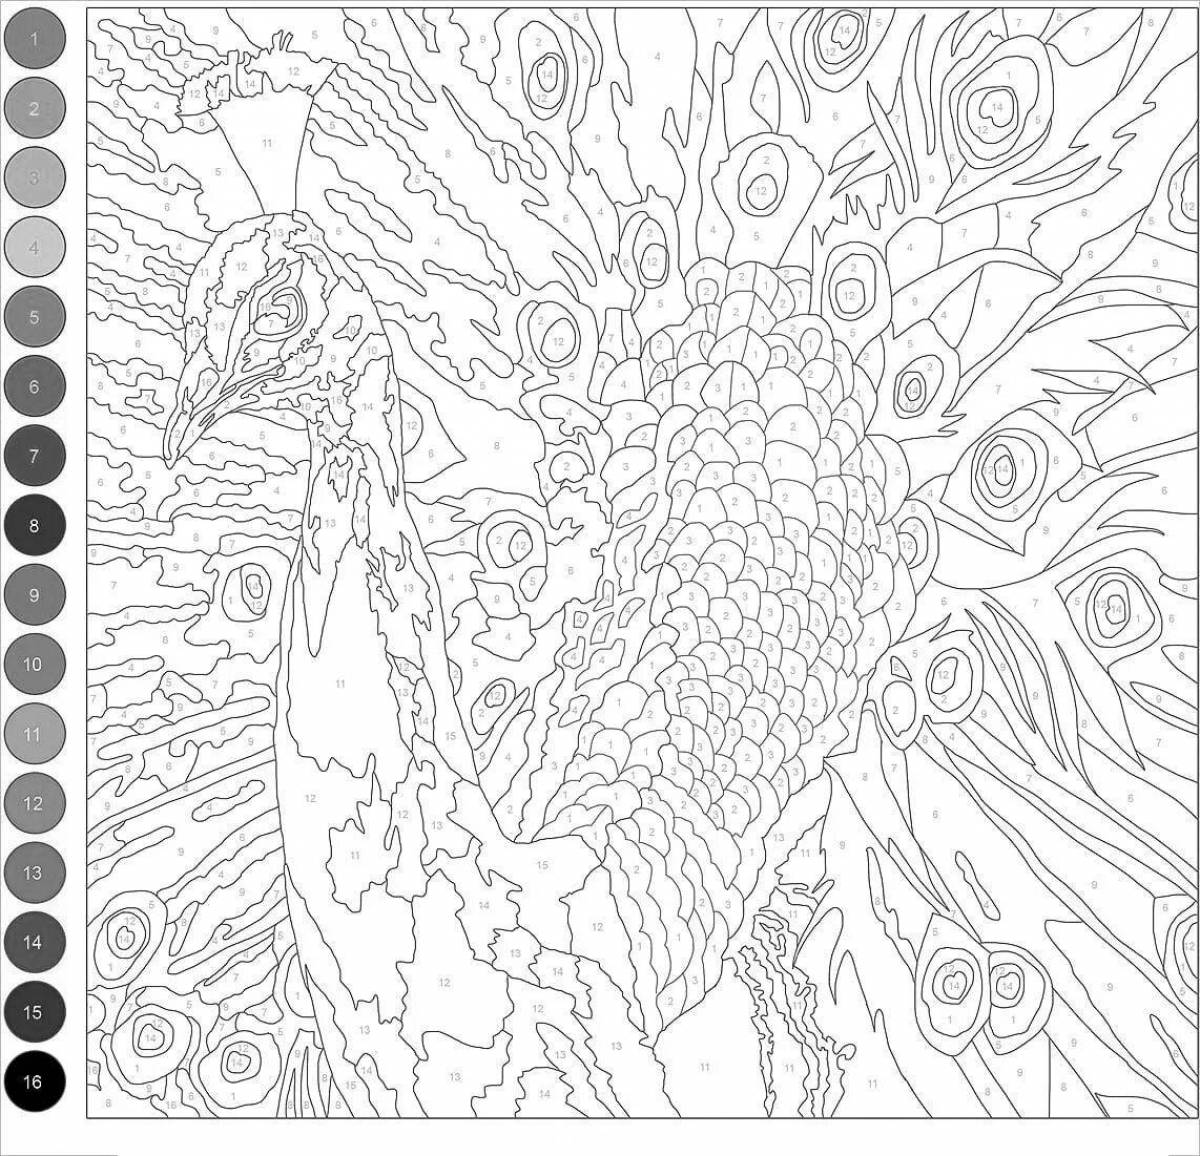 Color-based coloring book by numbers